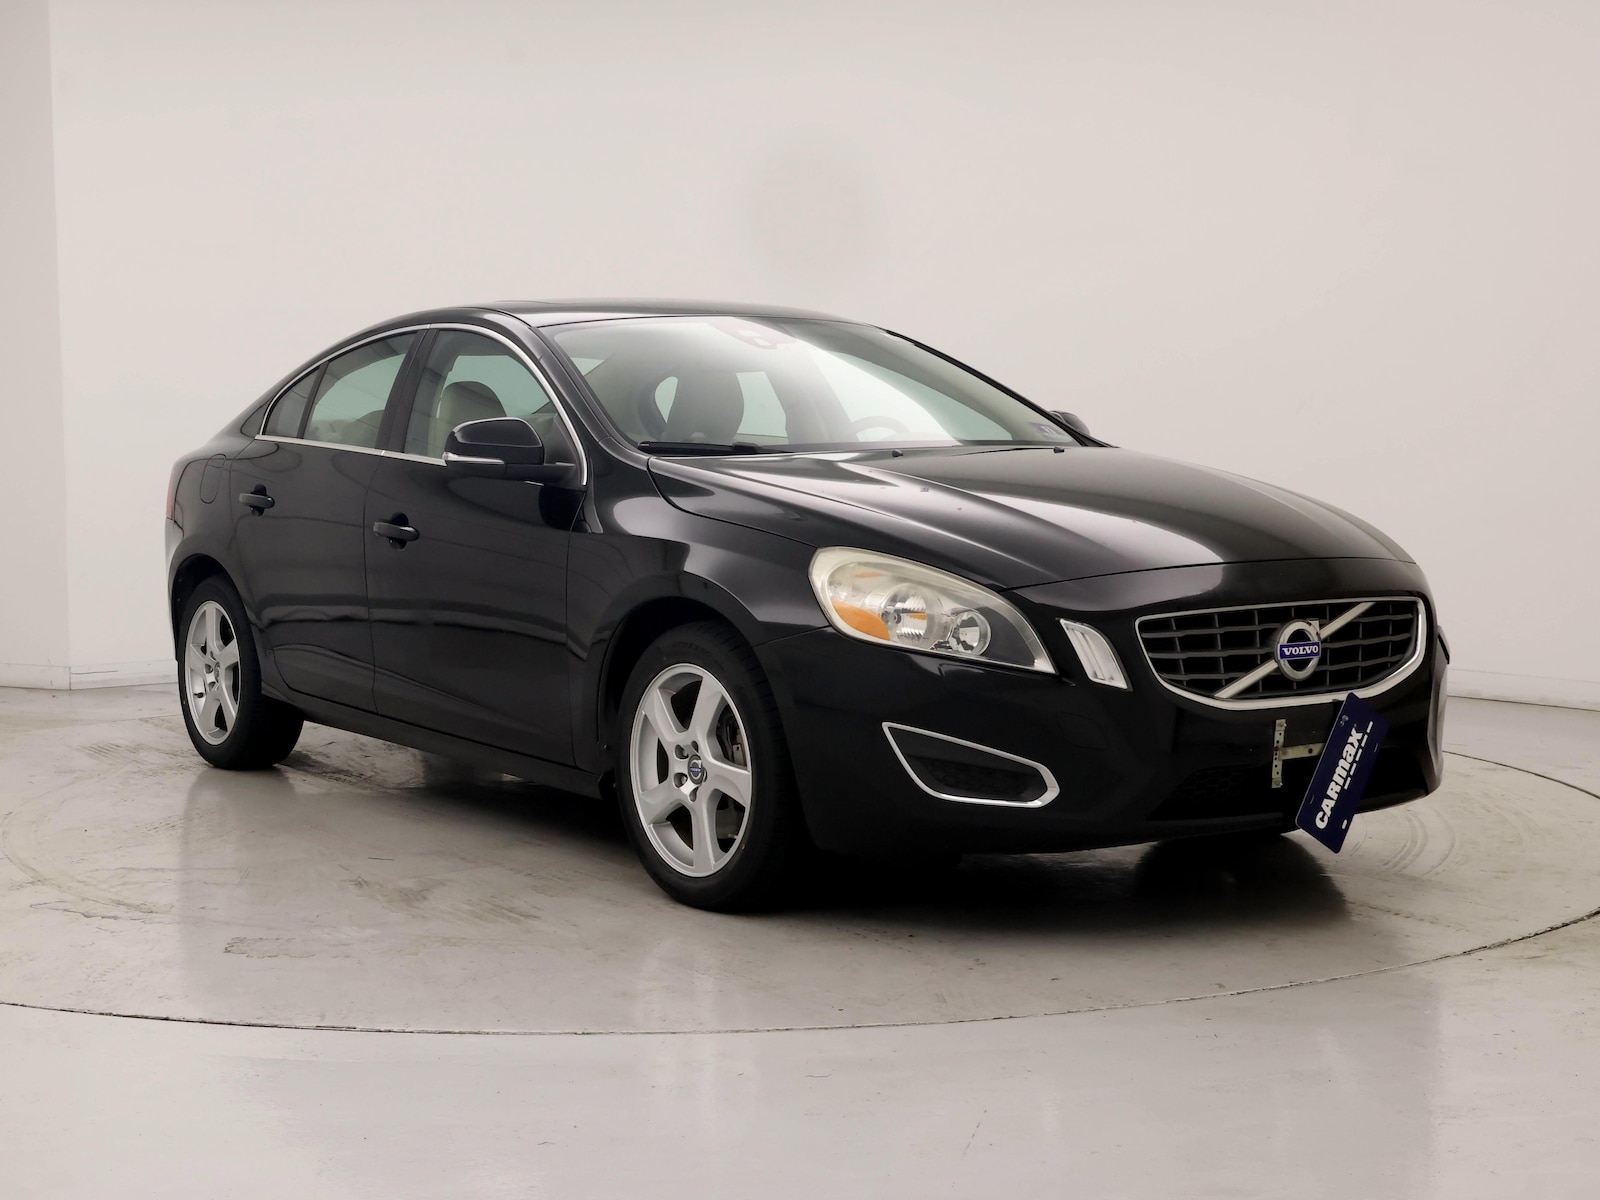 Used 2013 Volvo S60 T5 with VIN YV1612FS2D2217078 for sale in Kenosha, WI